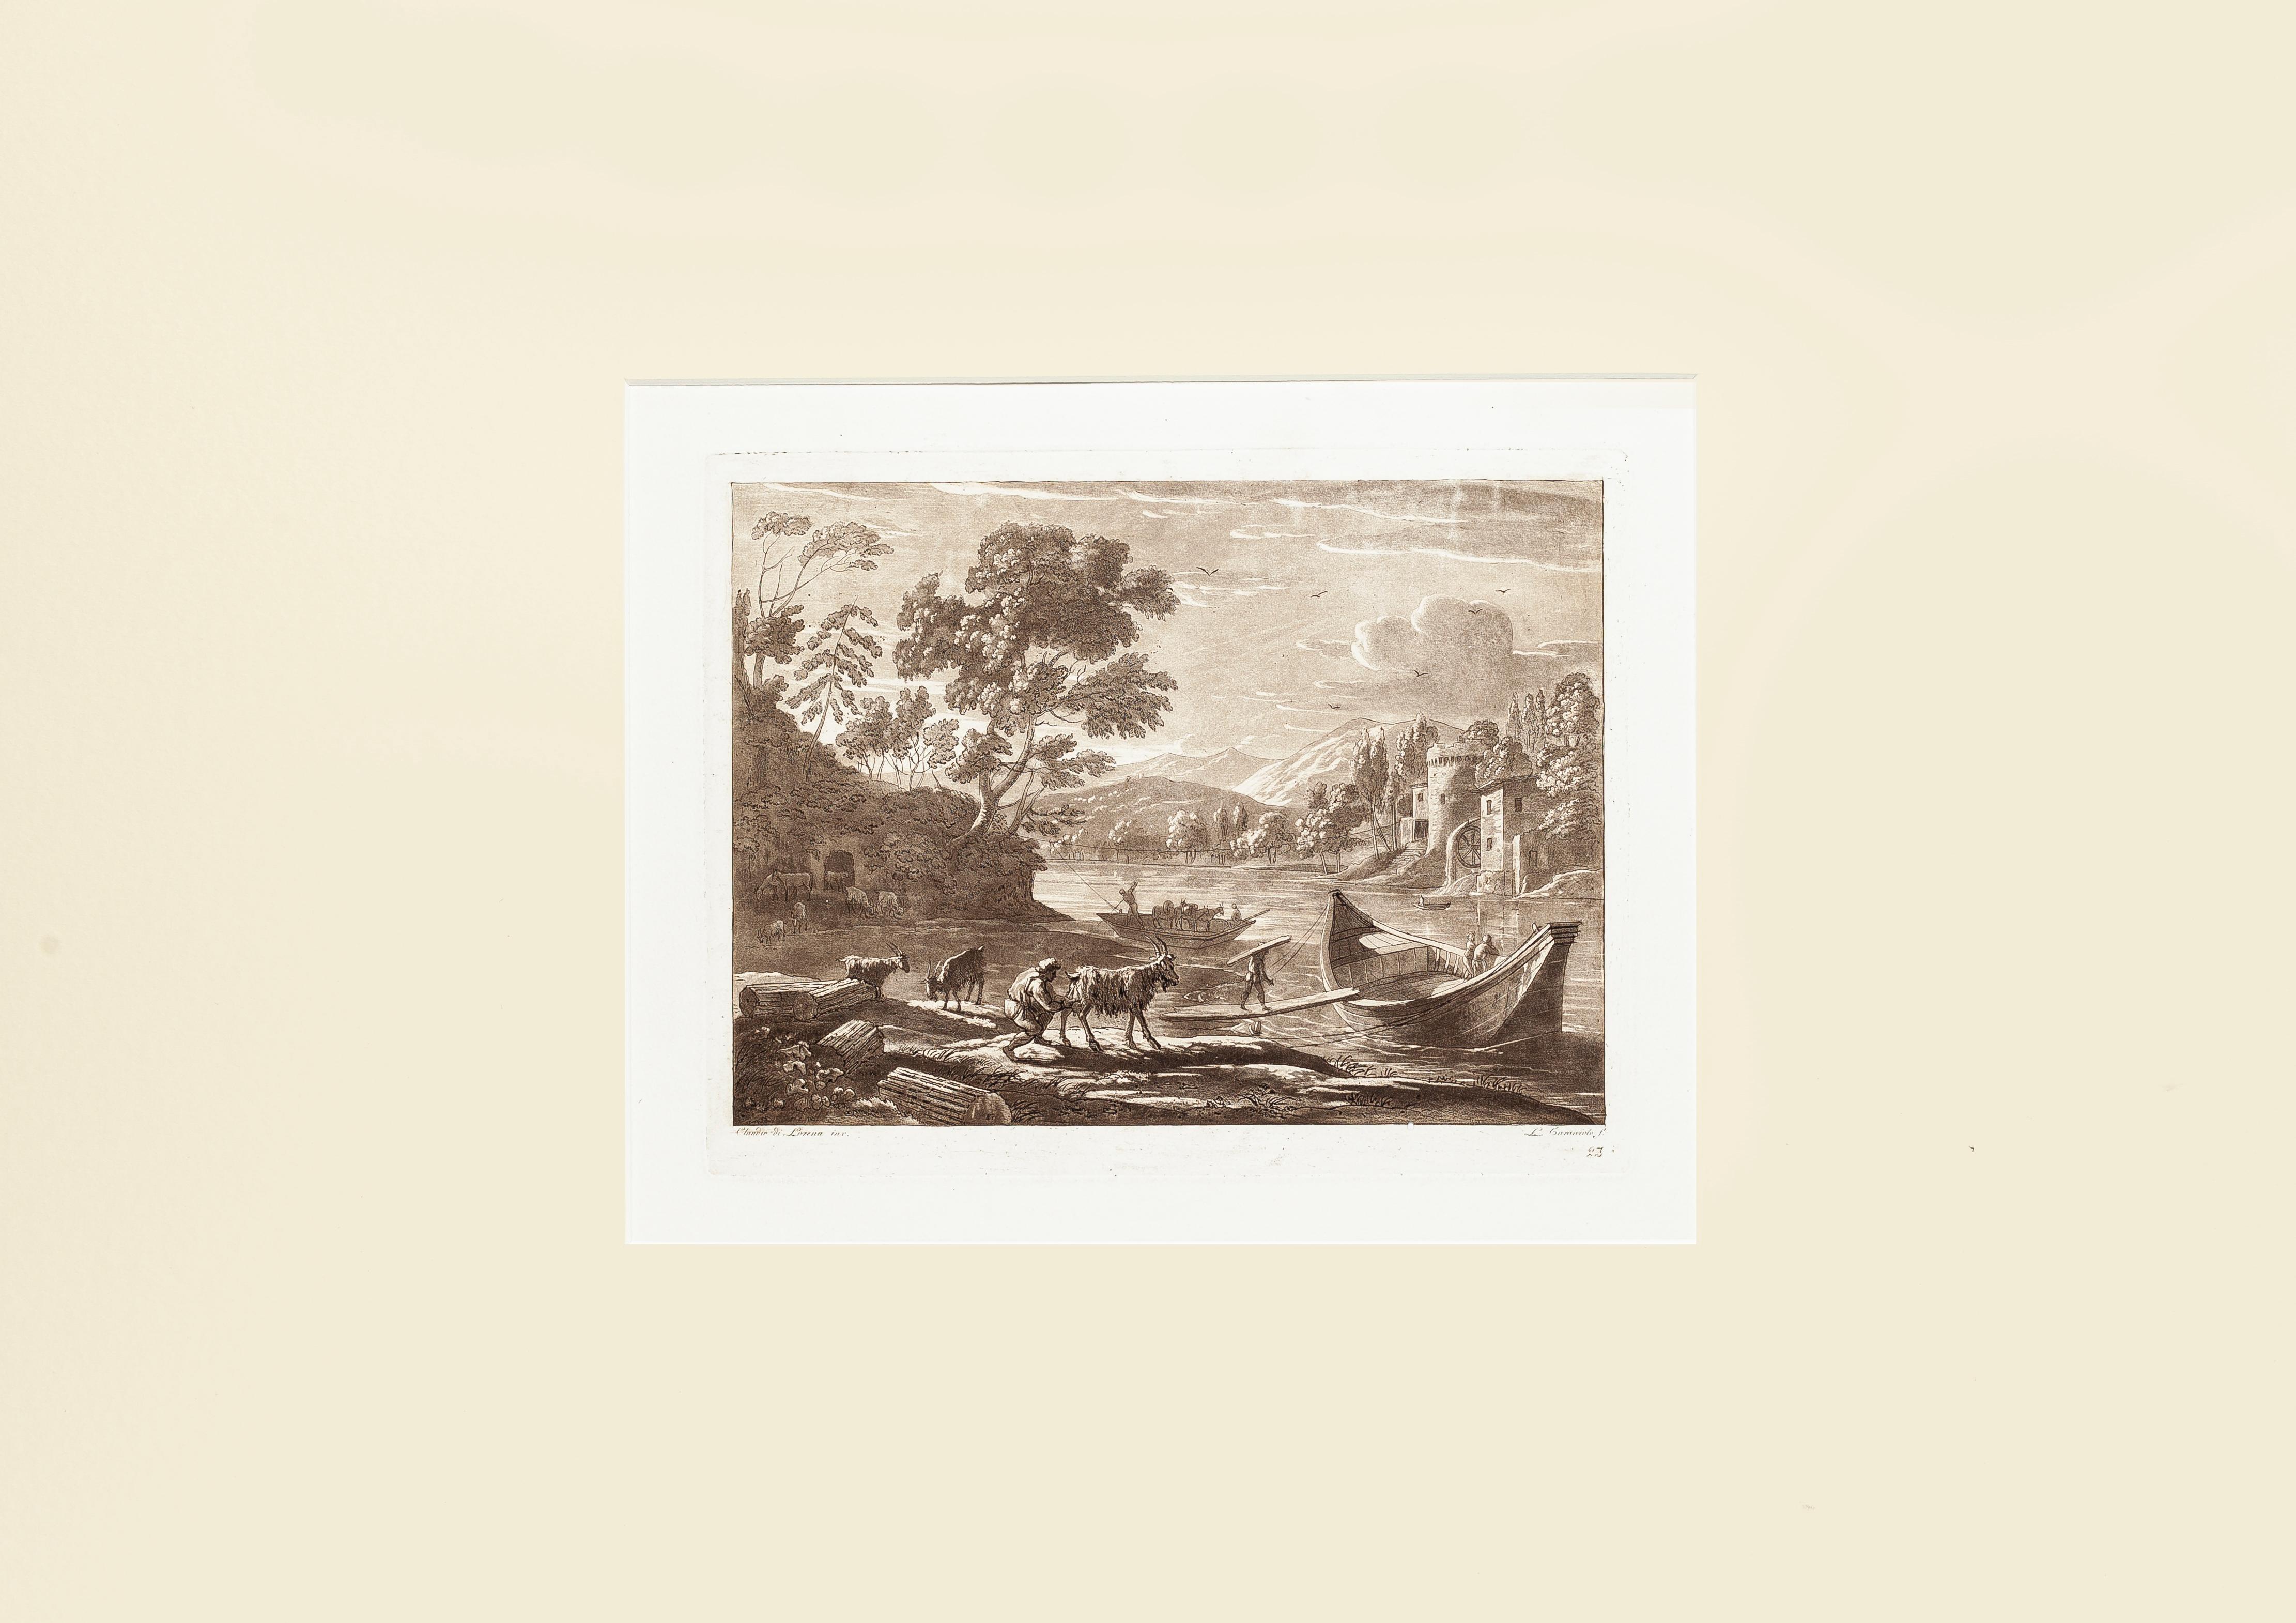 Landscape from Liber Veritatis - B/W Etching after Claude Lorrain - 1815 - Print by Ludovico Caracciolo